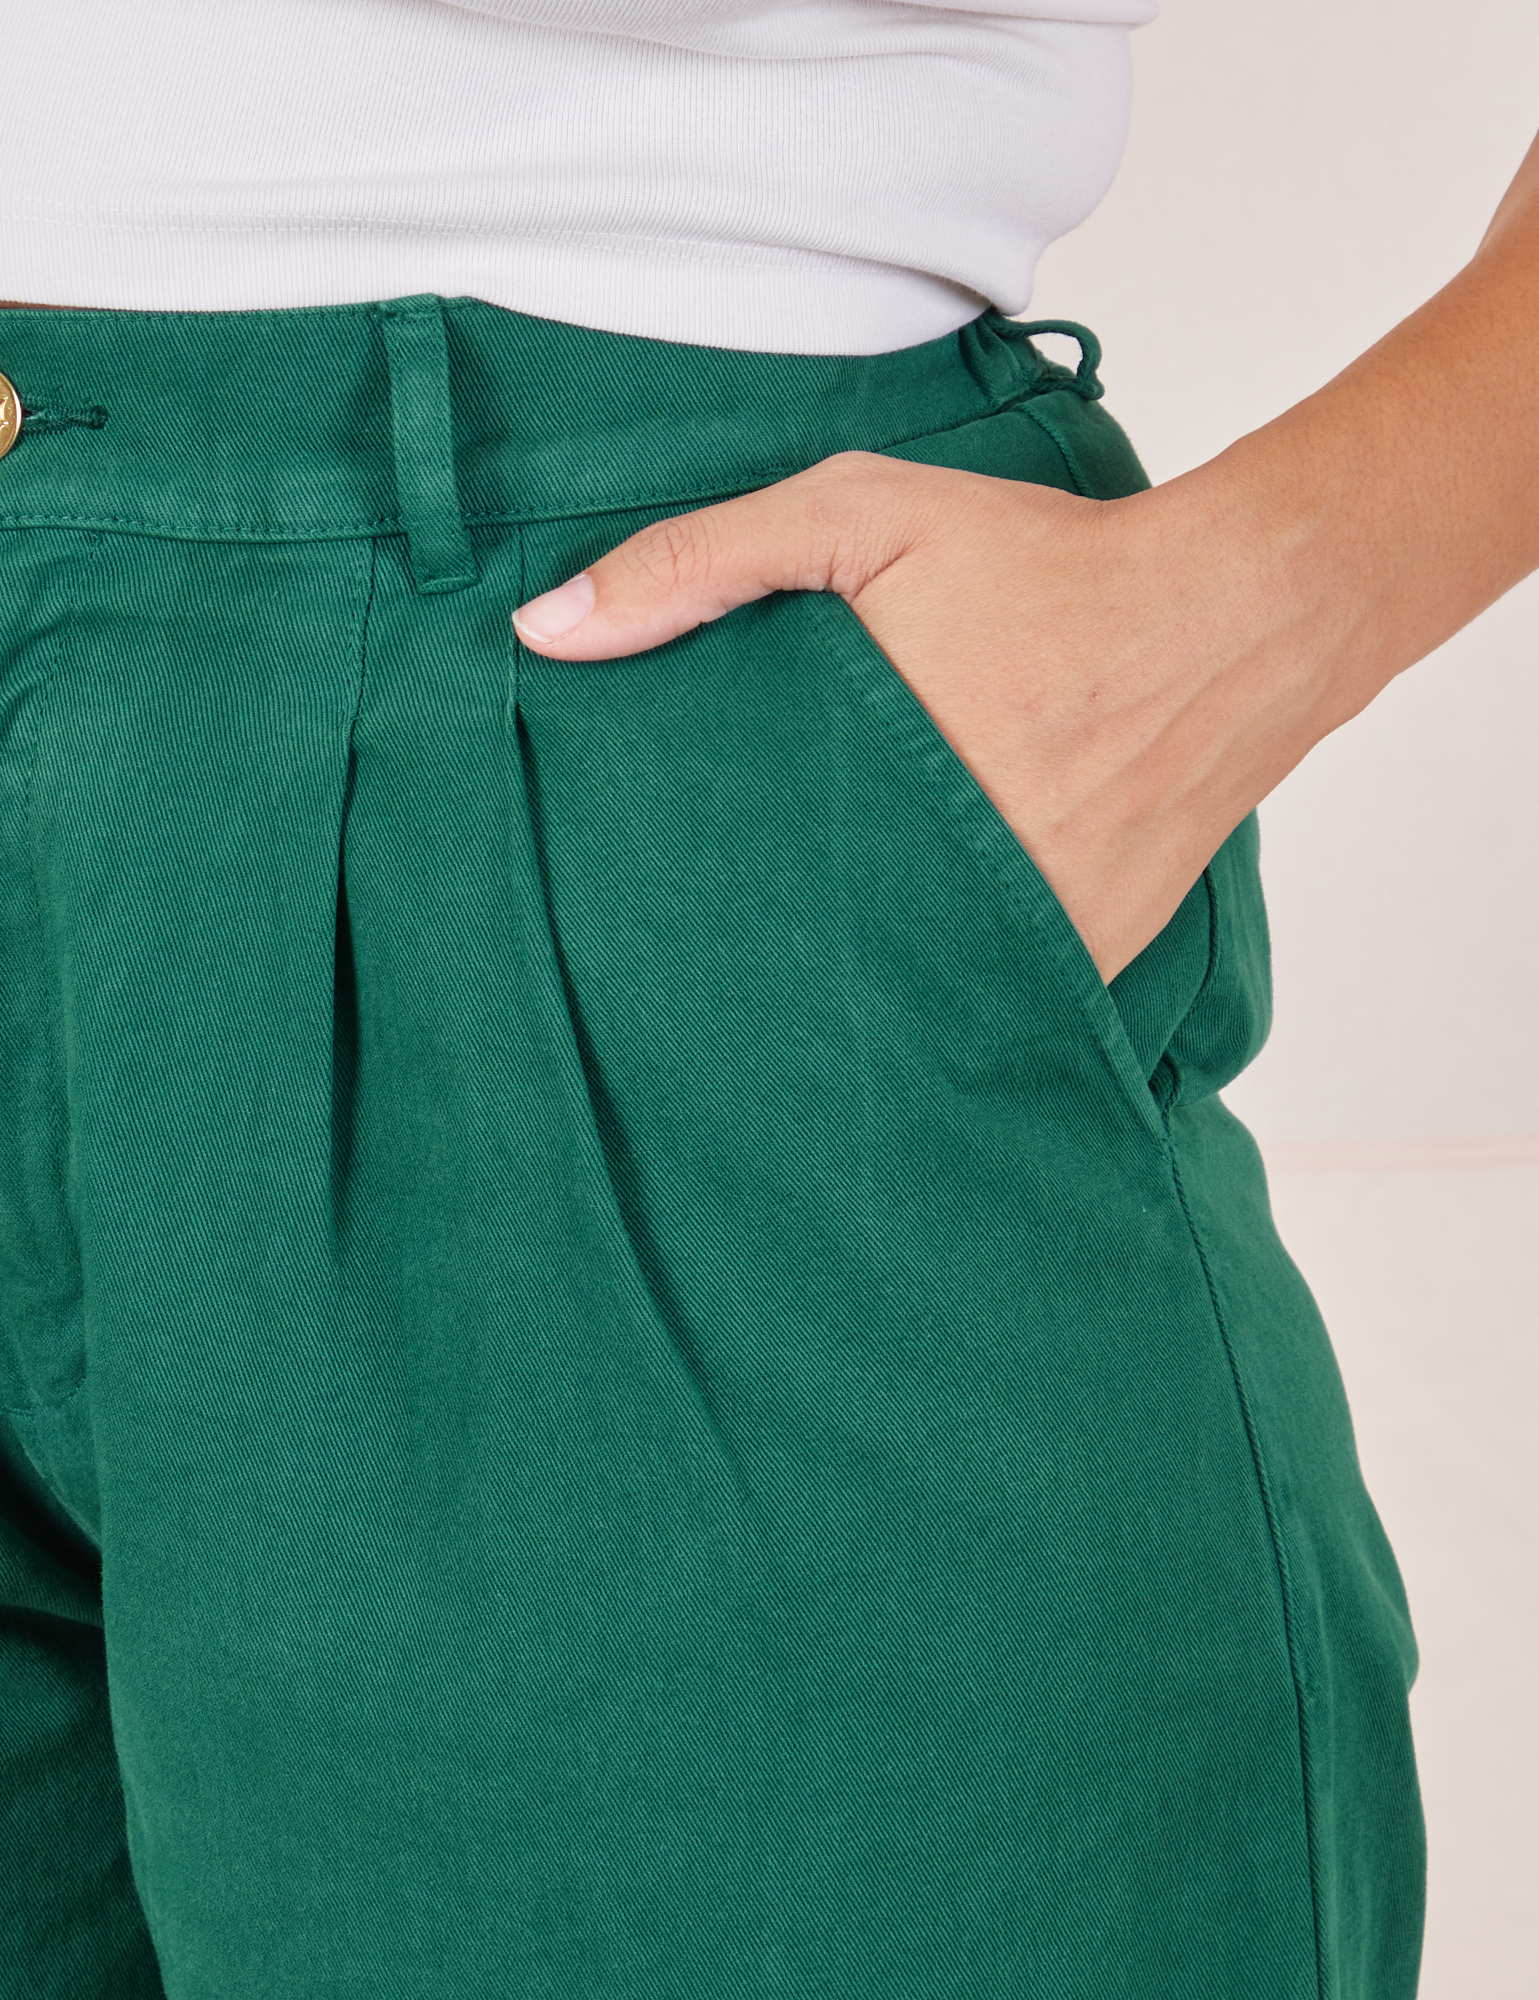 Front close up of Heavyweight Trousers in Hunter Green. Tiara has her hand in the pocket.